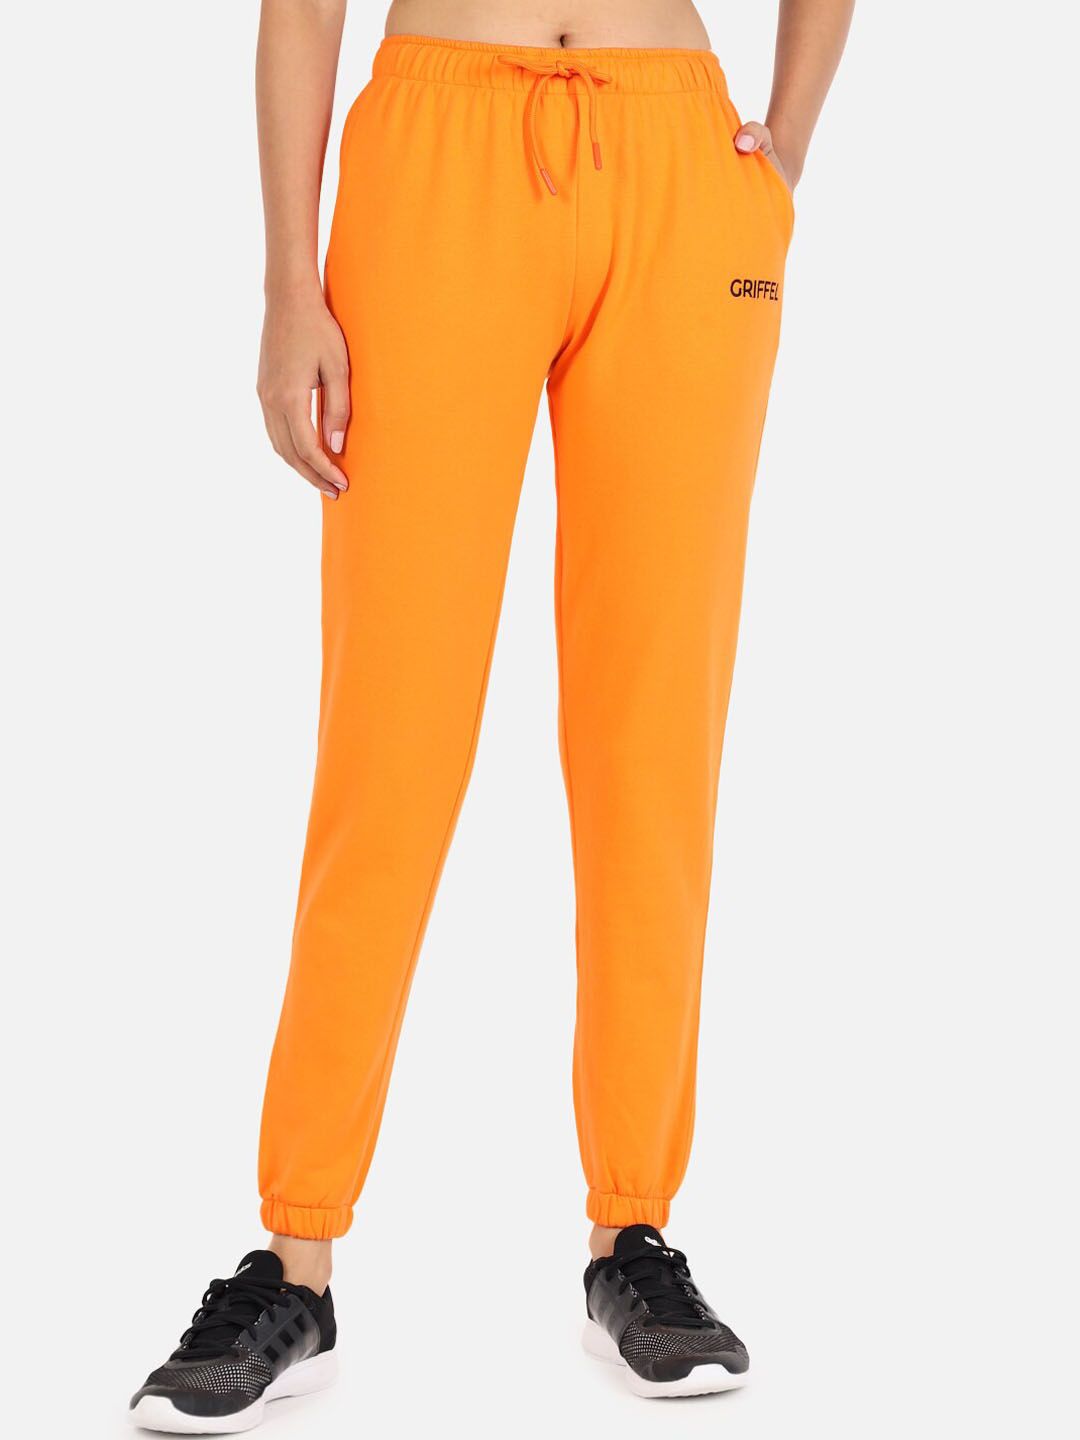 GRIFFEL Women Orange Solid Sports Cotton Joggers Price in India